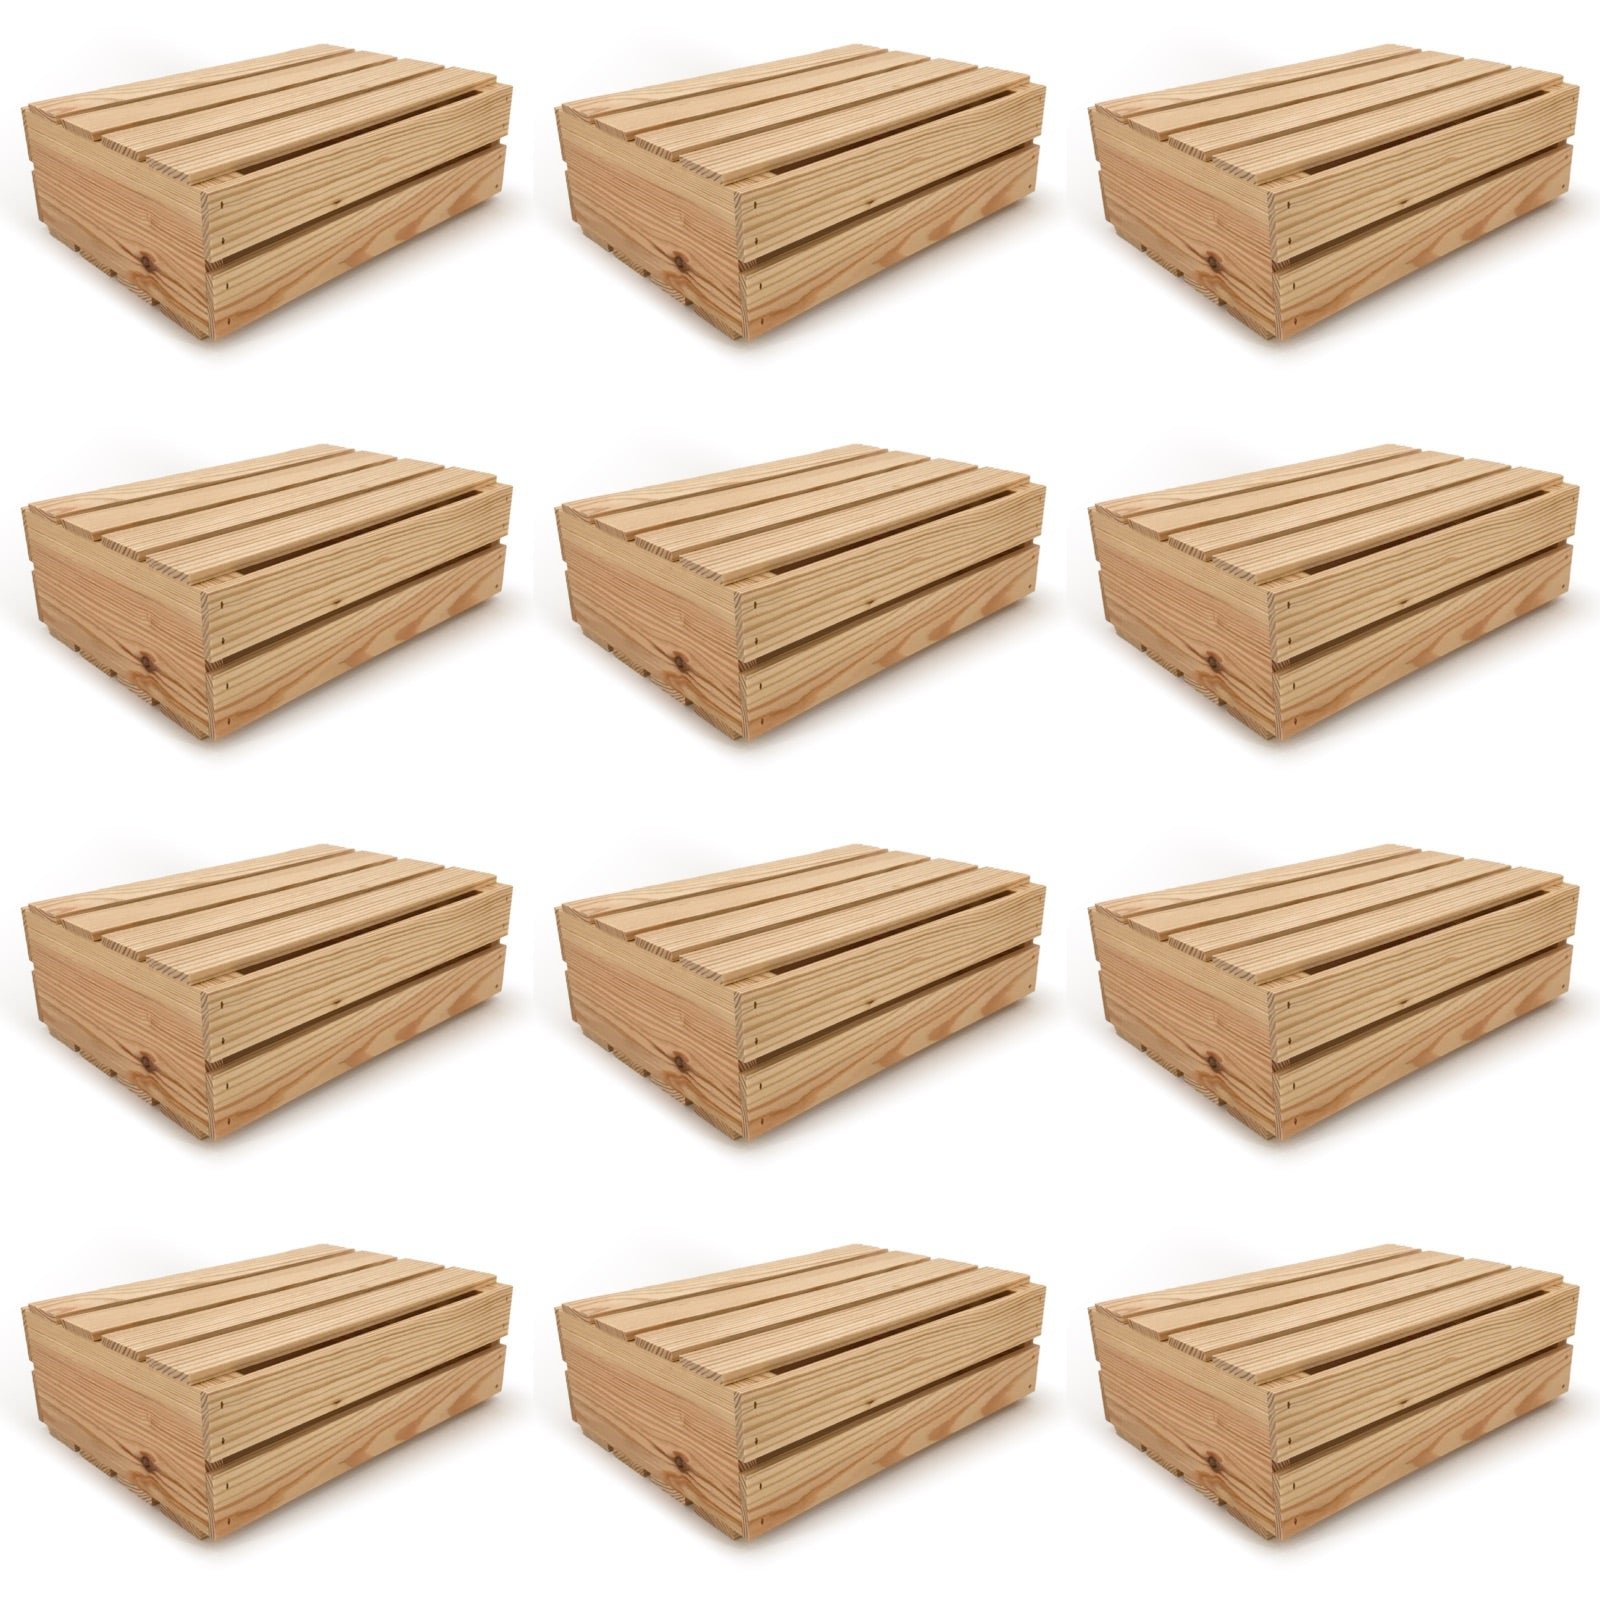 12 Small wooden crates with lid 16x12x5.25, 6-WS-16-12-5.25-NX-NW-LL, 12-WS-16-12-5.25-NX-NW-LL, 24-WS-16-12-5.25-NX-NW-LL, 48-WS-16-12-5.25-NX-NW-LL, 96-WS-16-12-5.25-NX-NW-LL